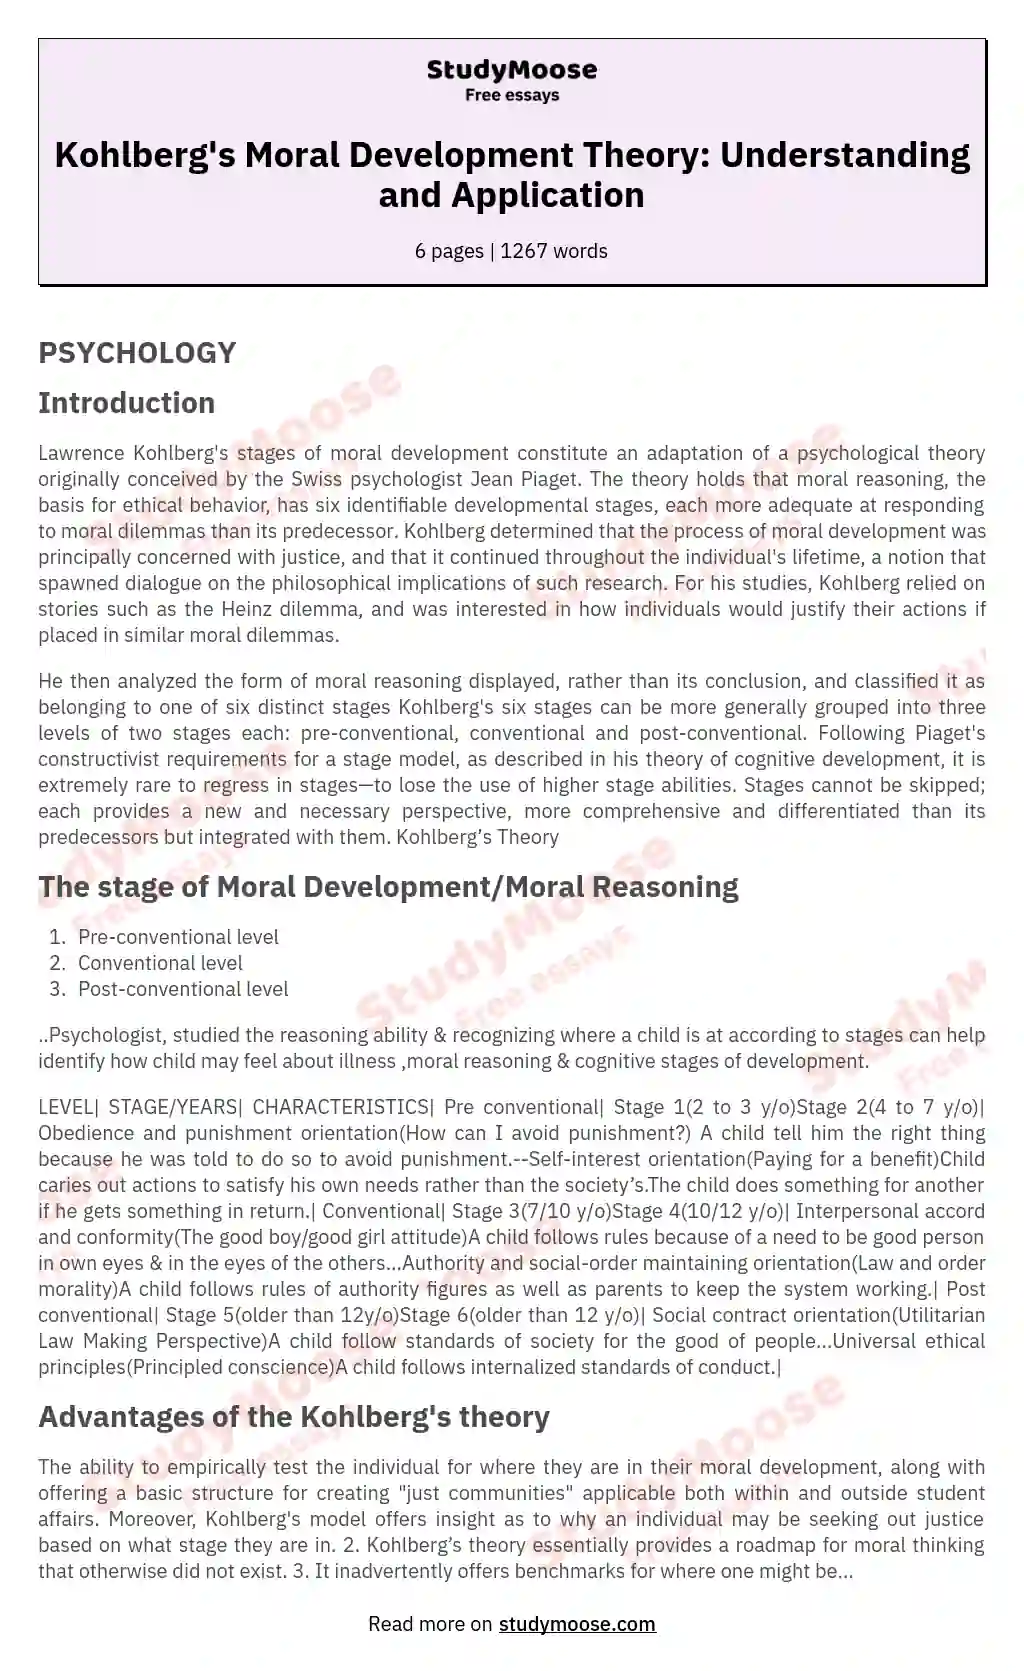 Kohlberg's Moral Development Theory: Understanding and Application essay